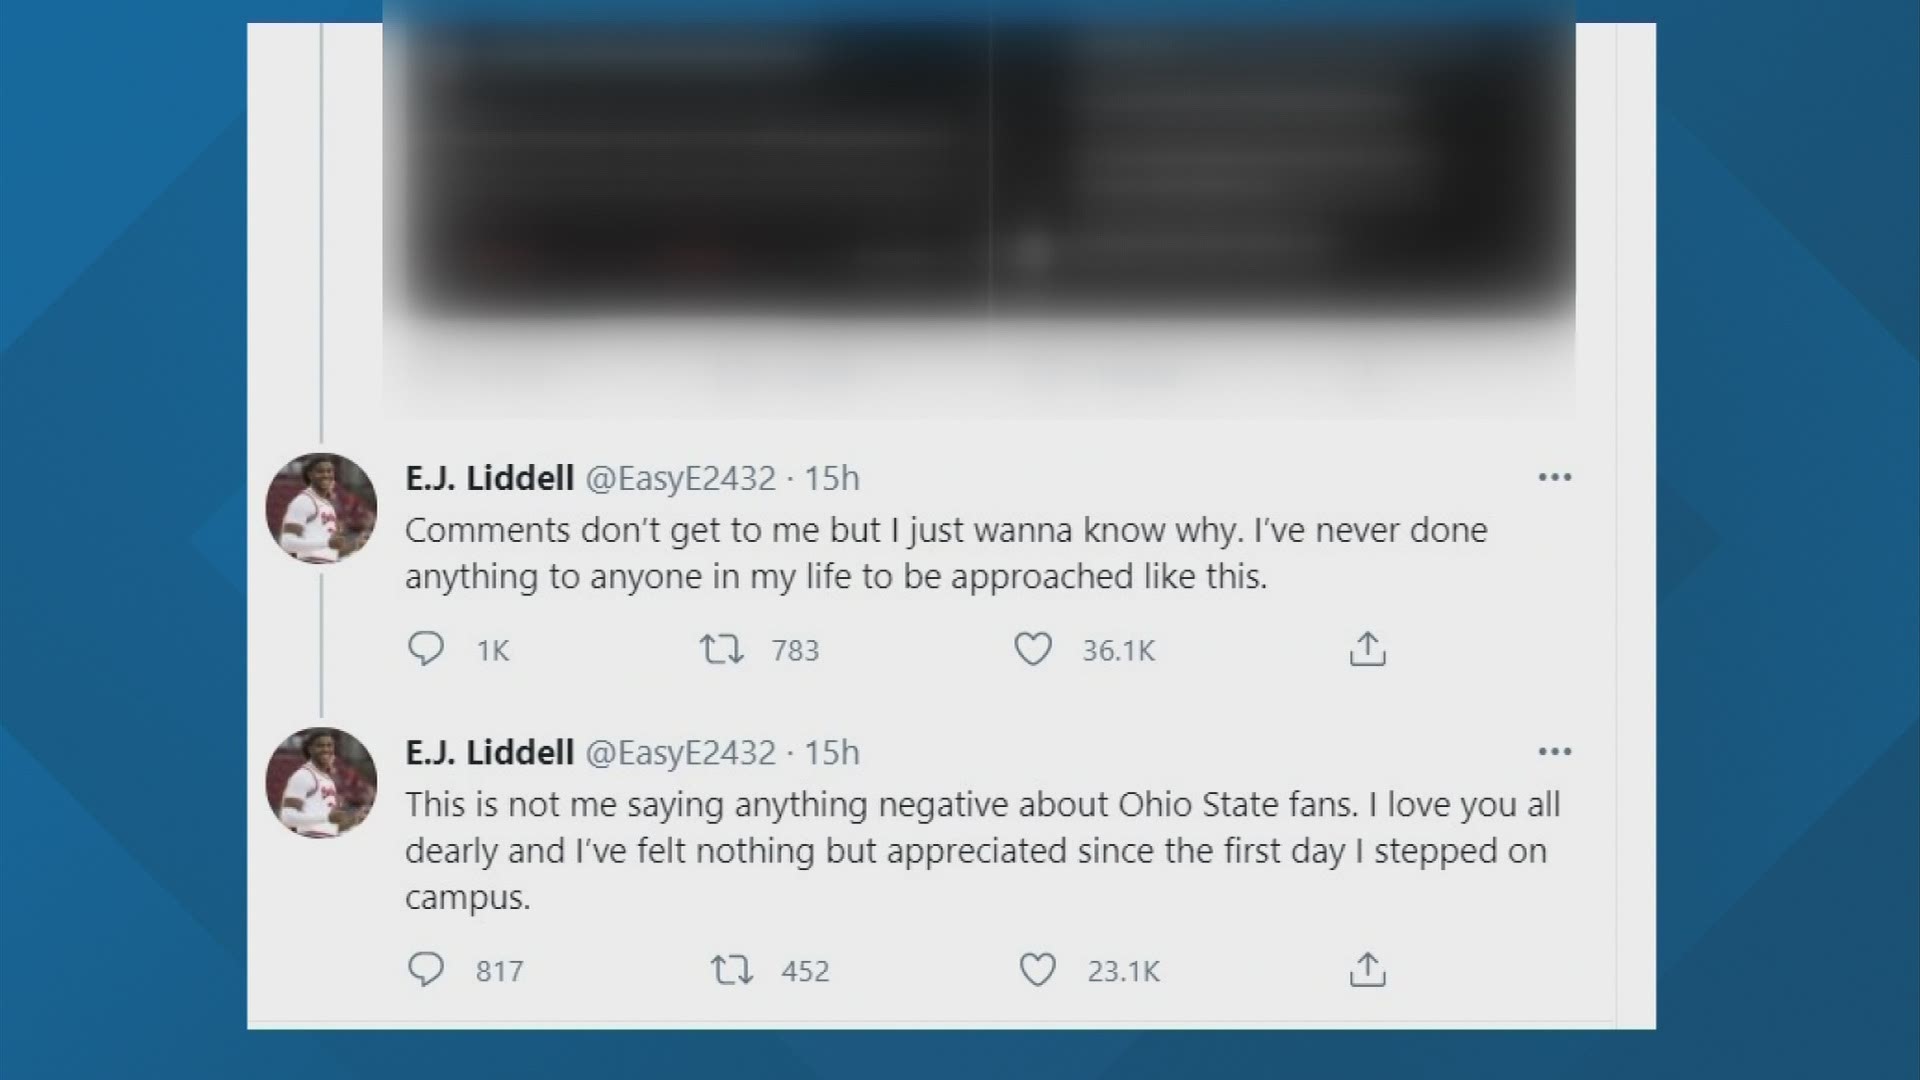 Liddell received the threats after the Buckeyes lost to Oral Roberts in the NCAA Tournament.